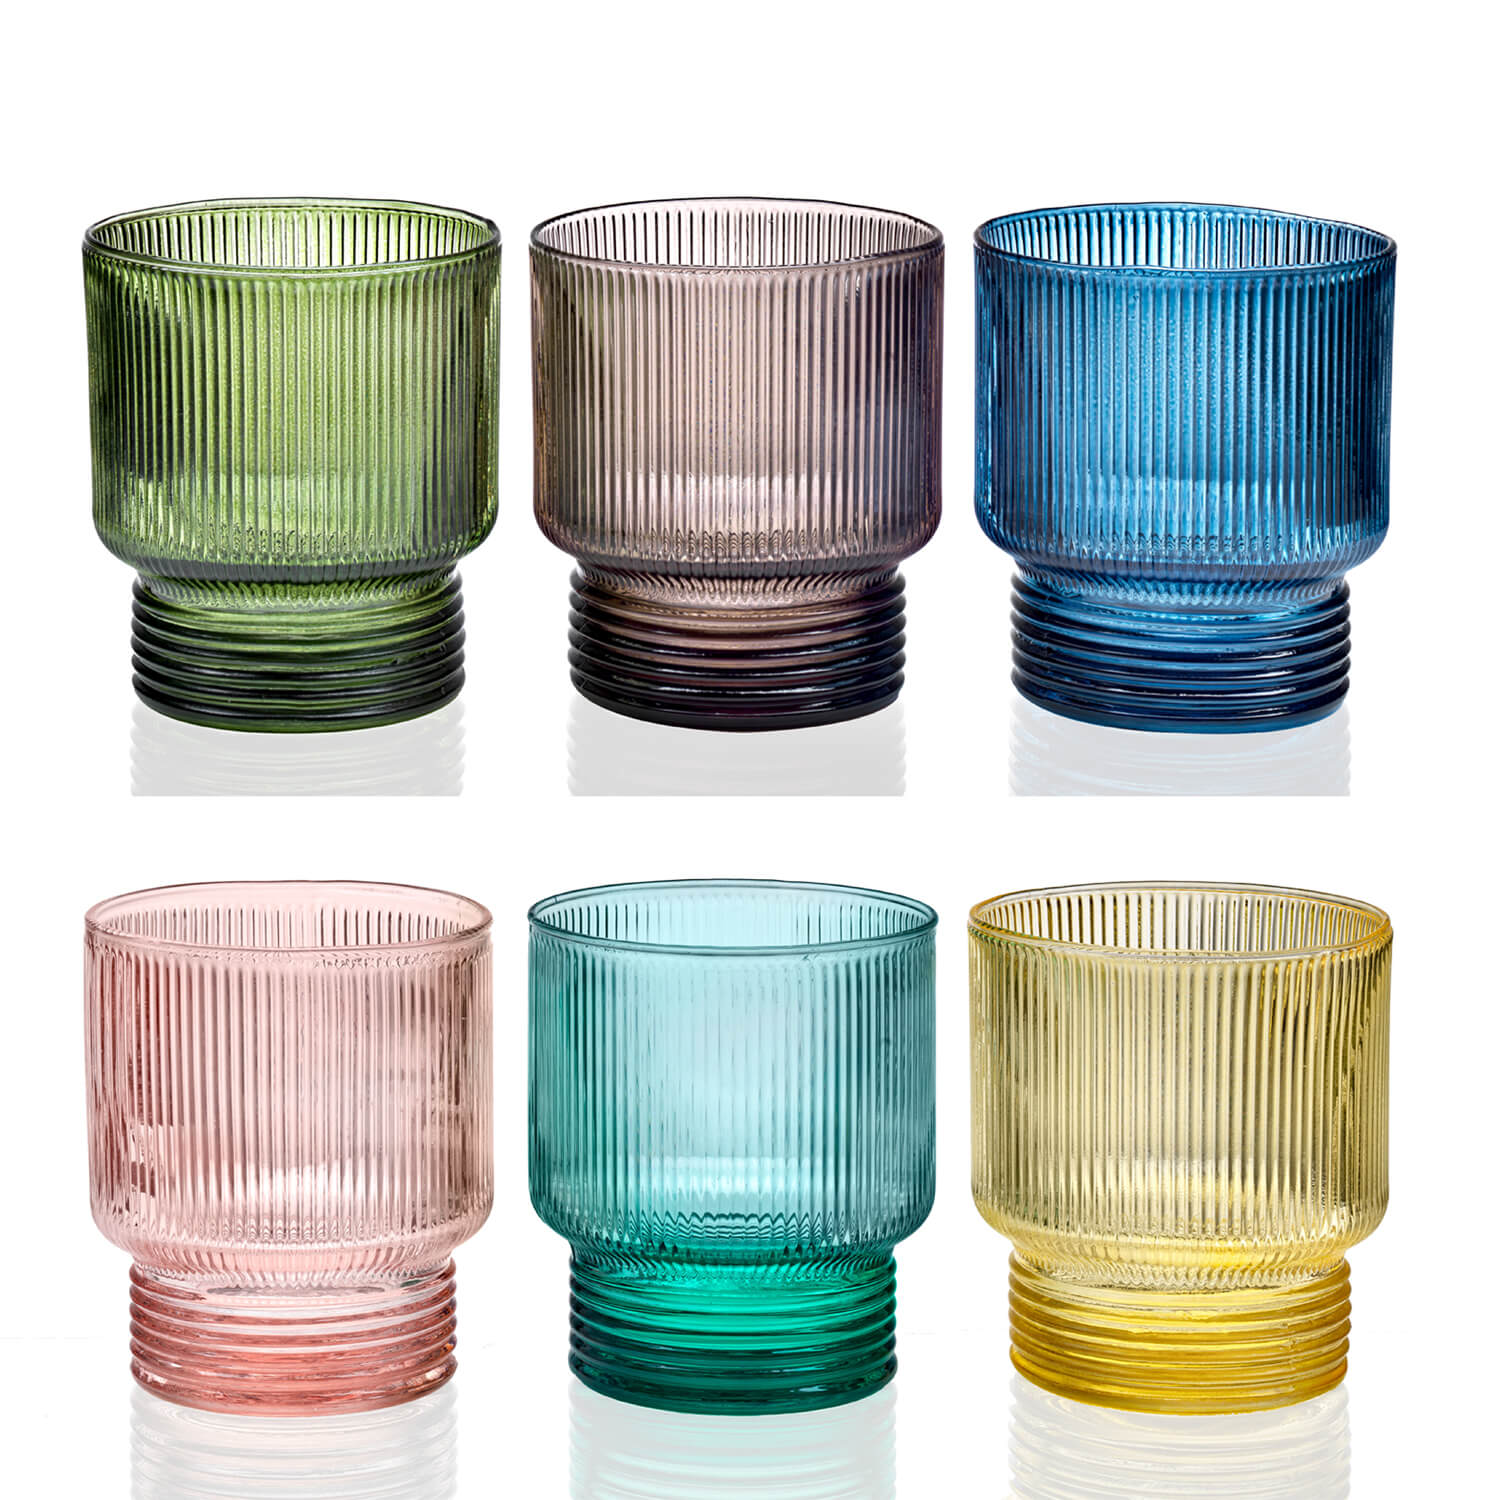 IVV Todo Modo Set 6 water glasses assorted colors, 30 cl